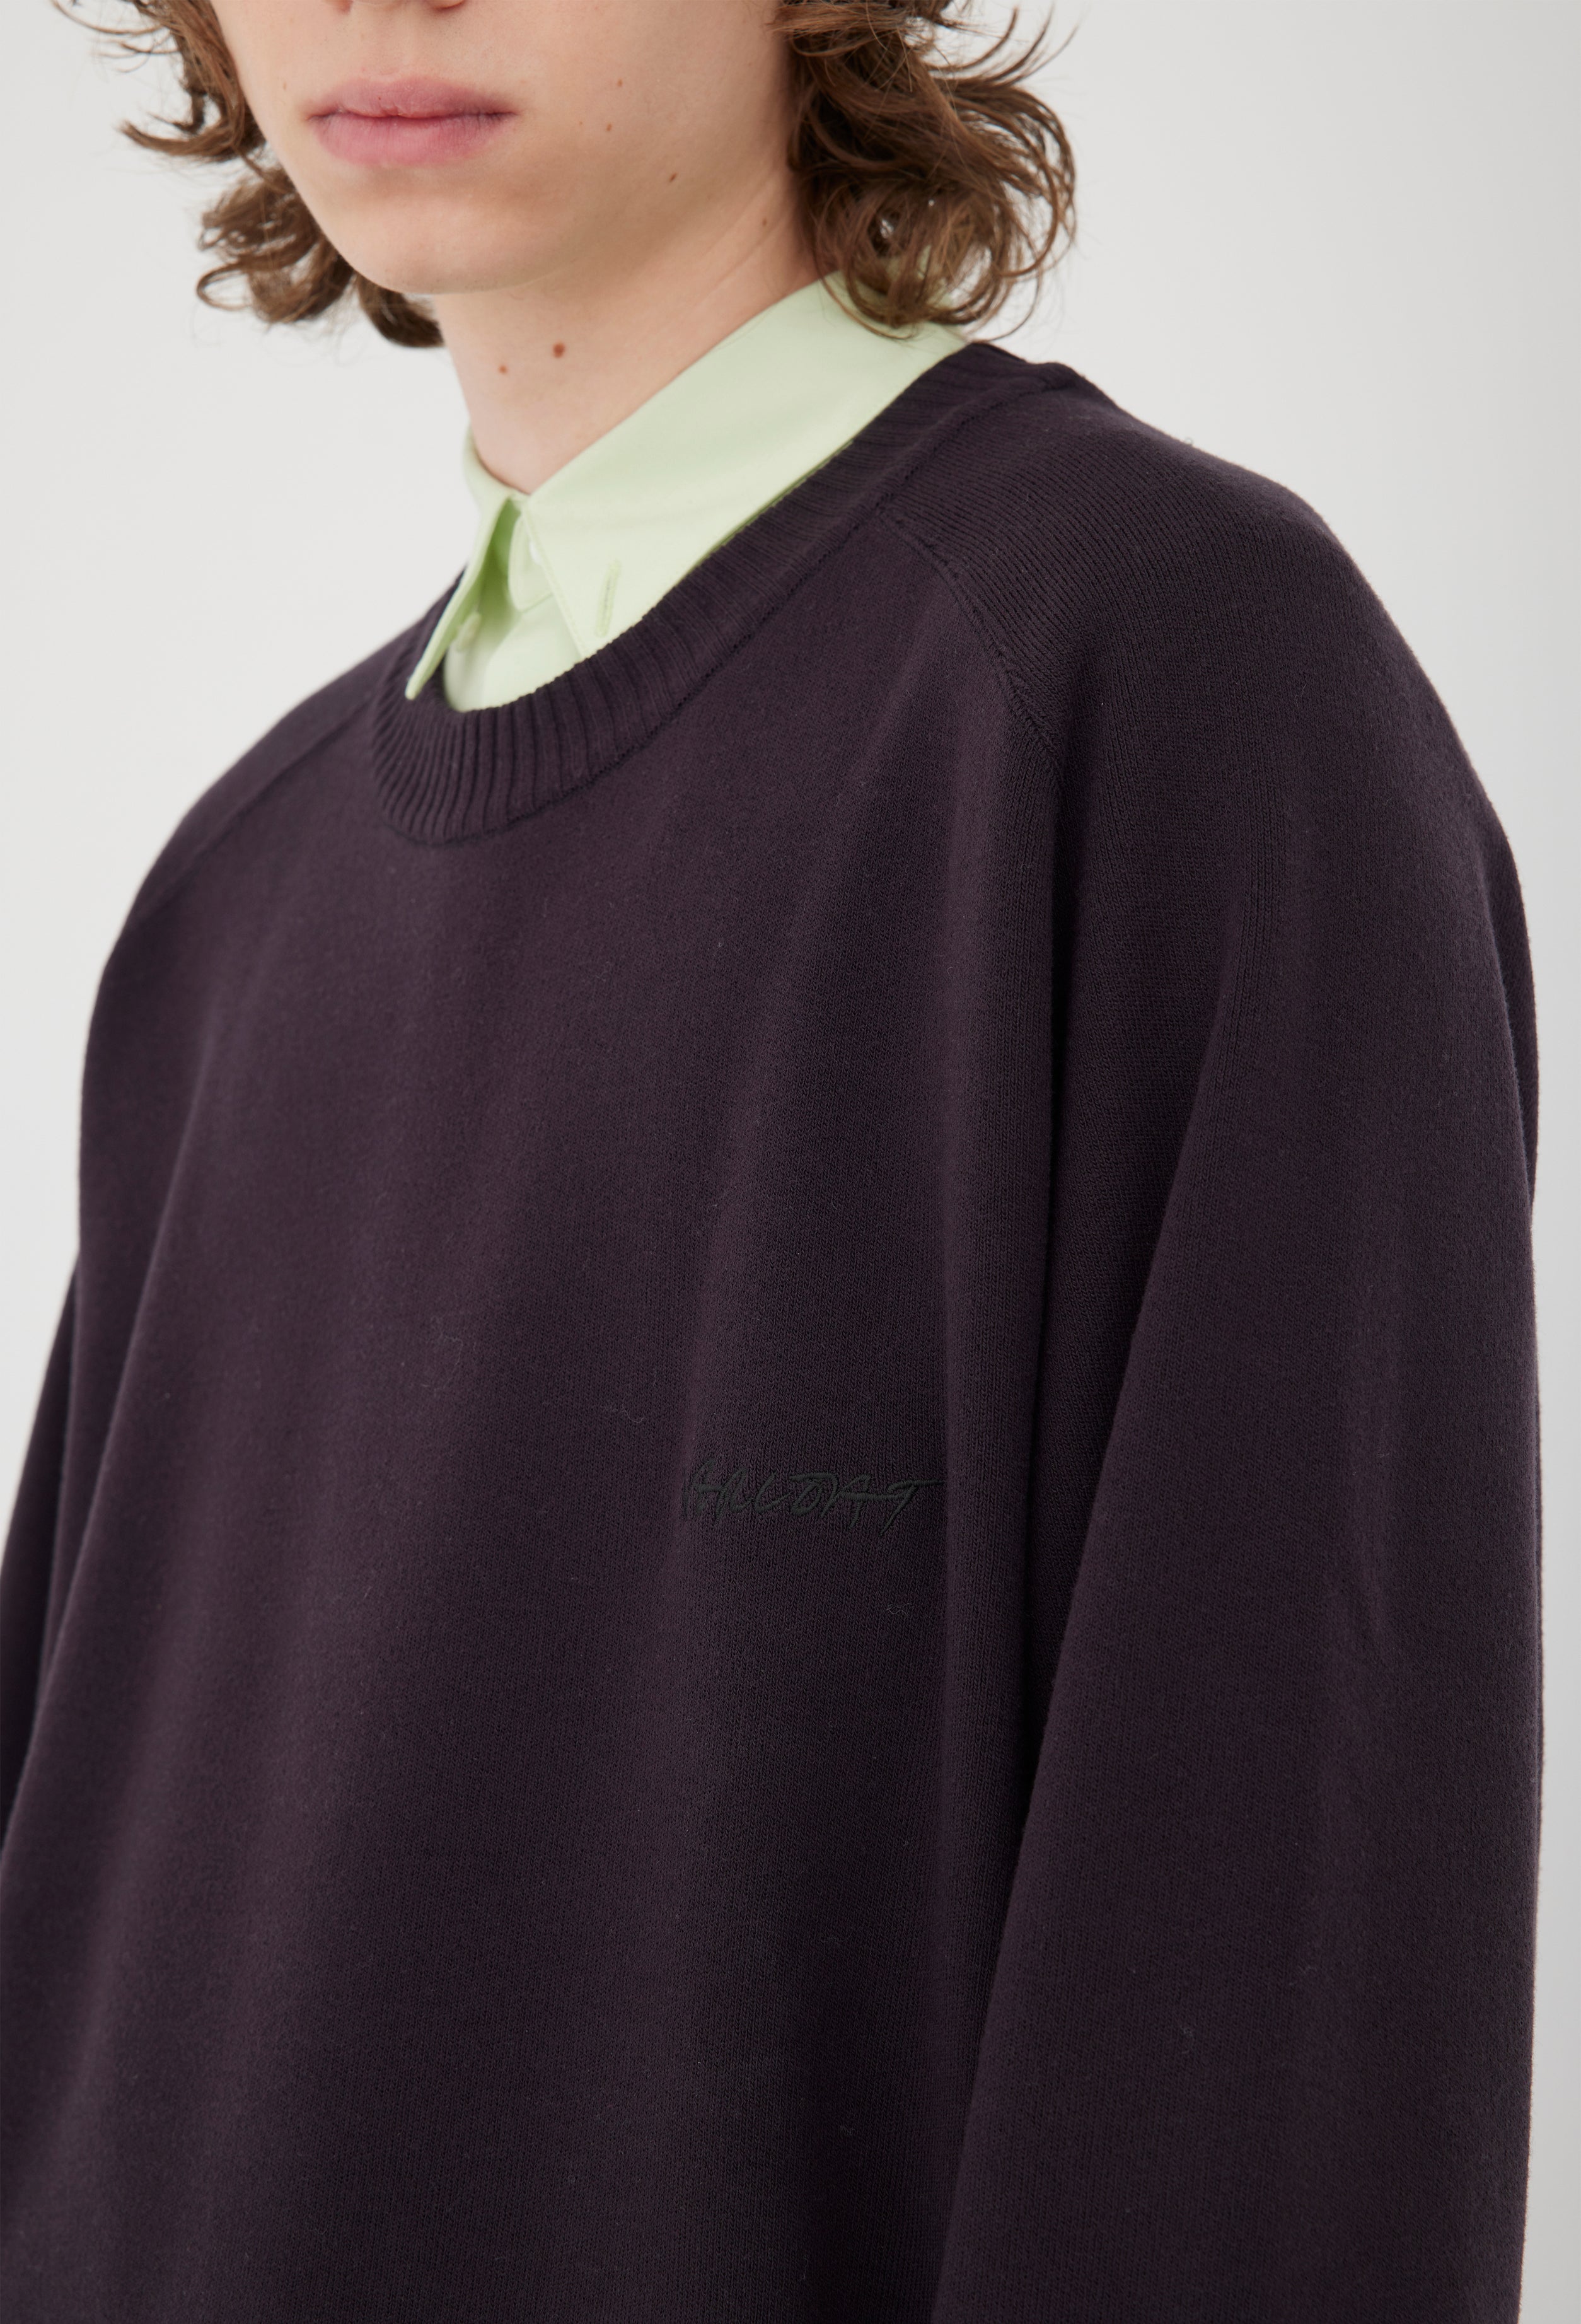 Wool Knit Crewneck Pullover in Coffee Bean